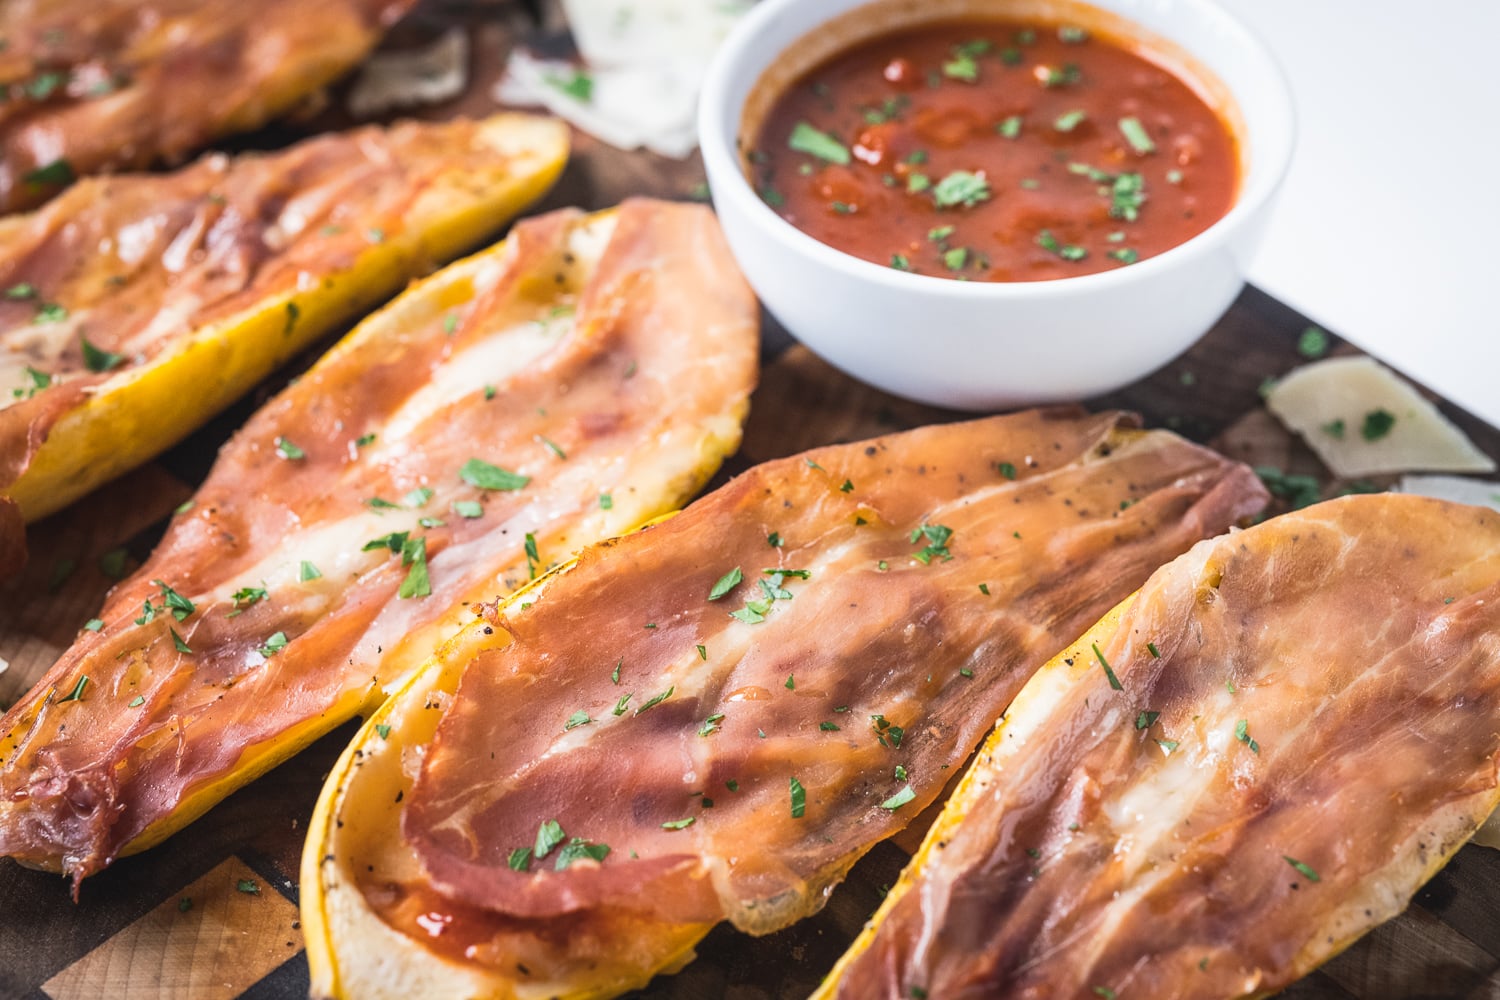 Stuffed yellow squash topped with marinara, cheese, and prosciutto on a wooden serving board.